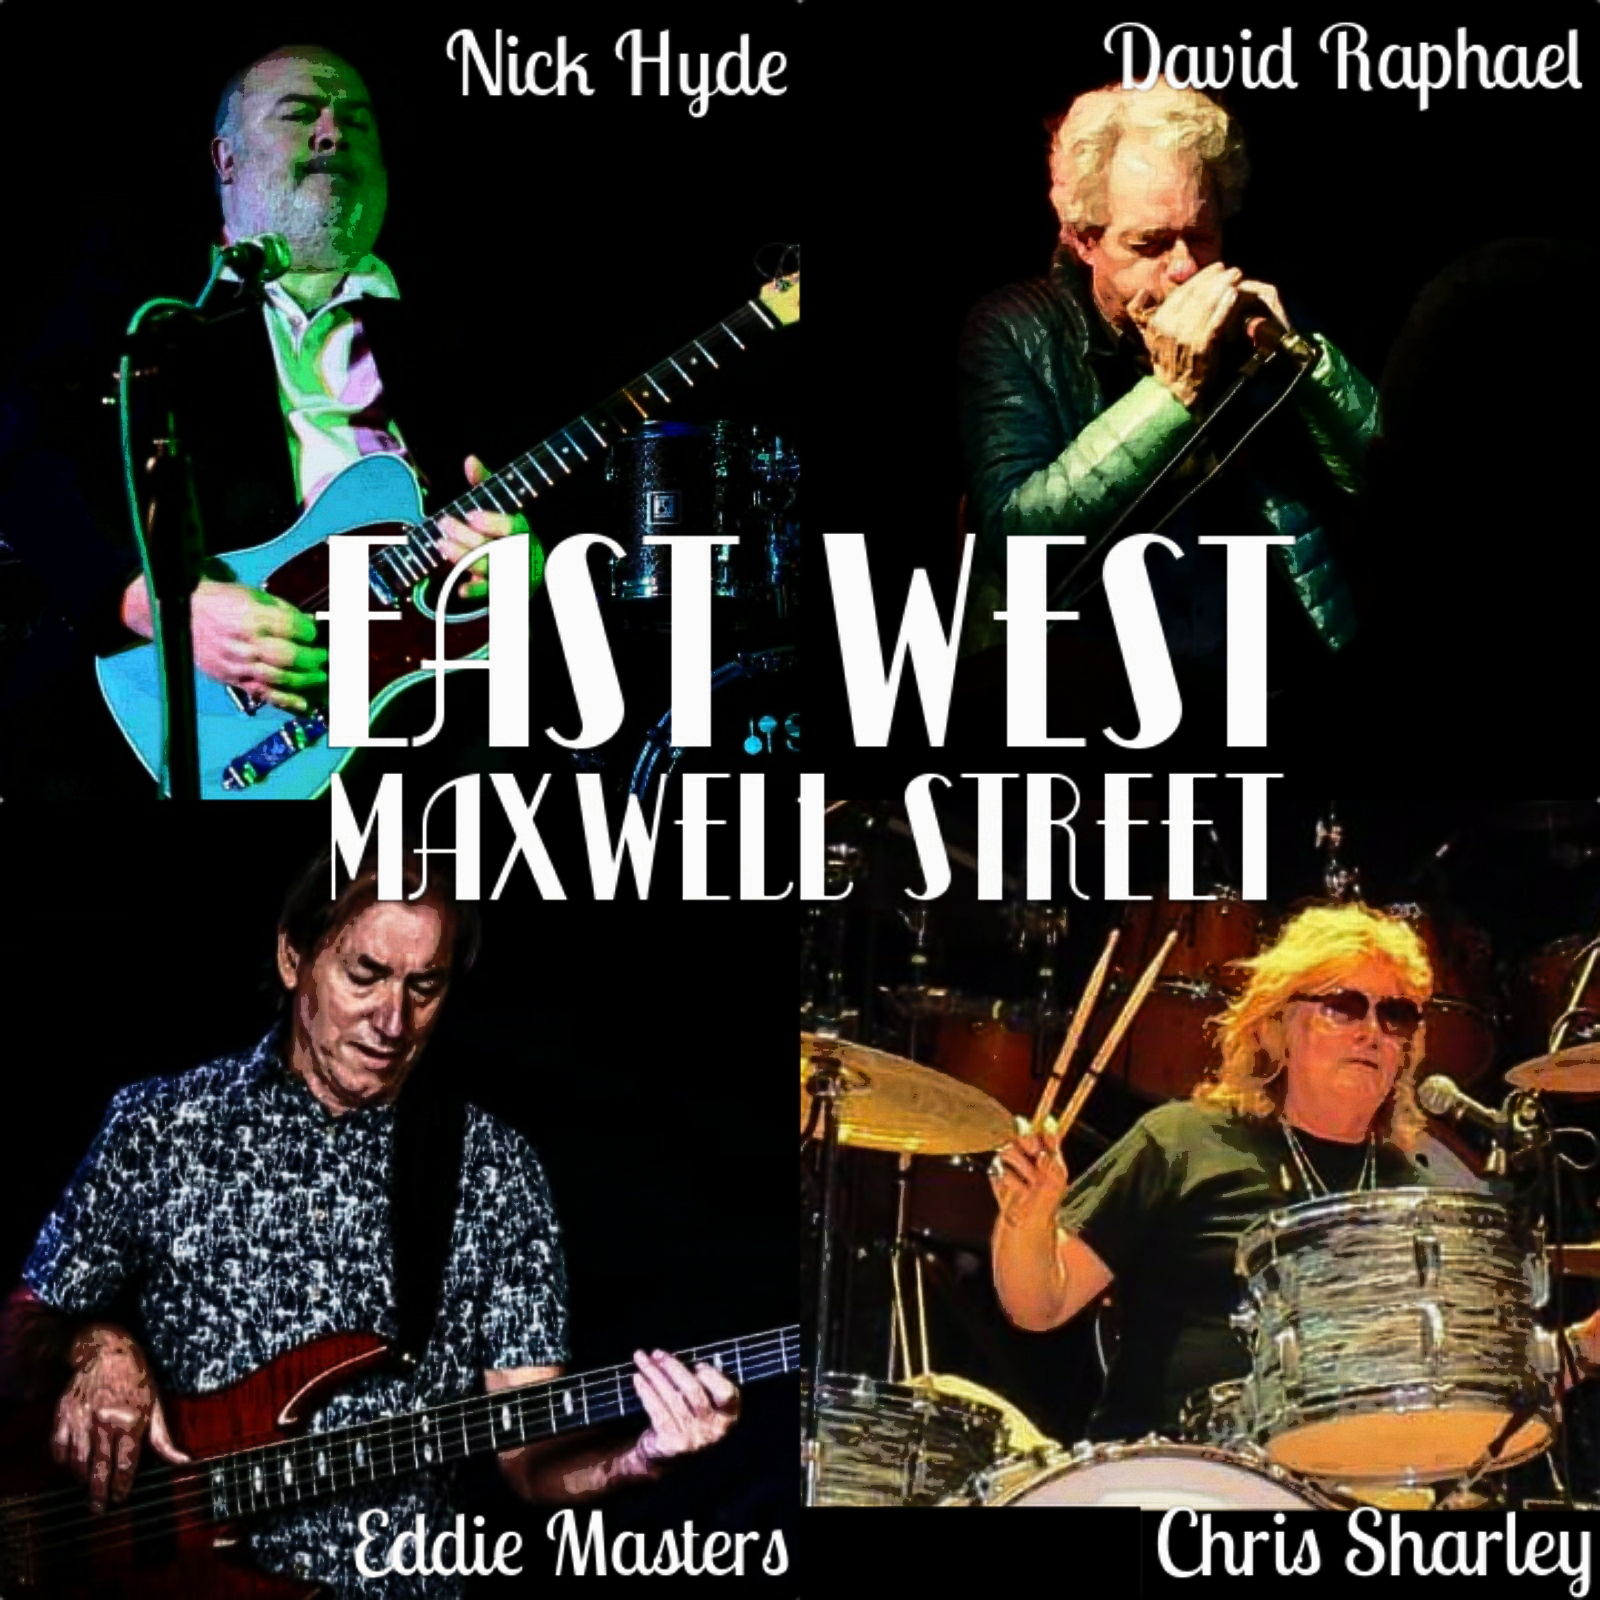 East-West Maxwell Street & Guests Christmas show